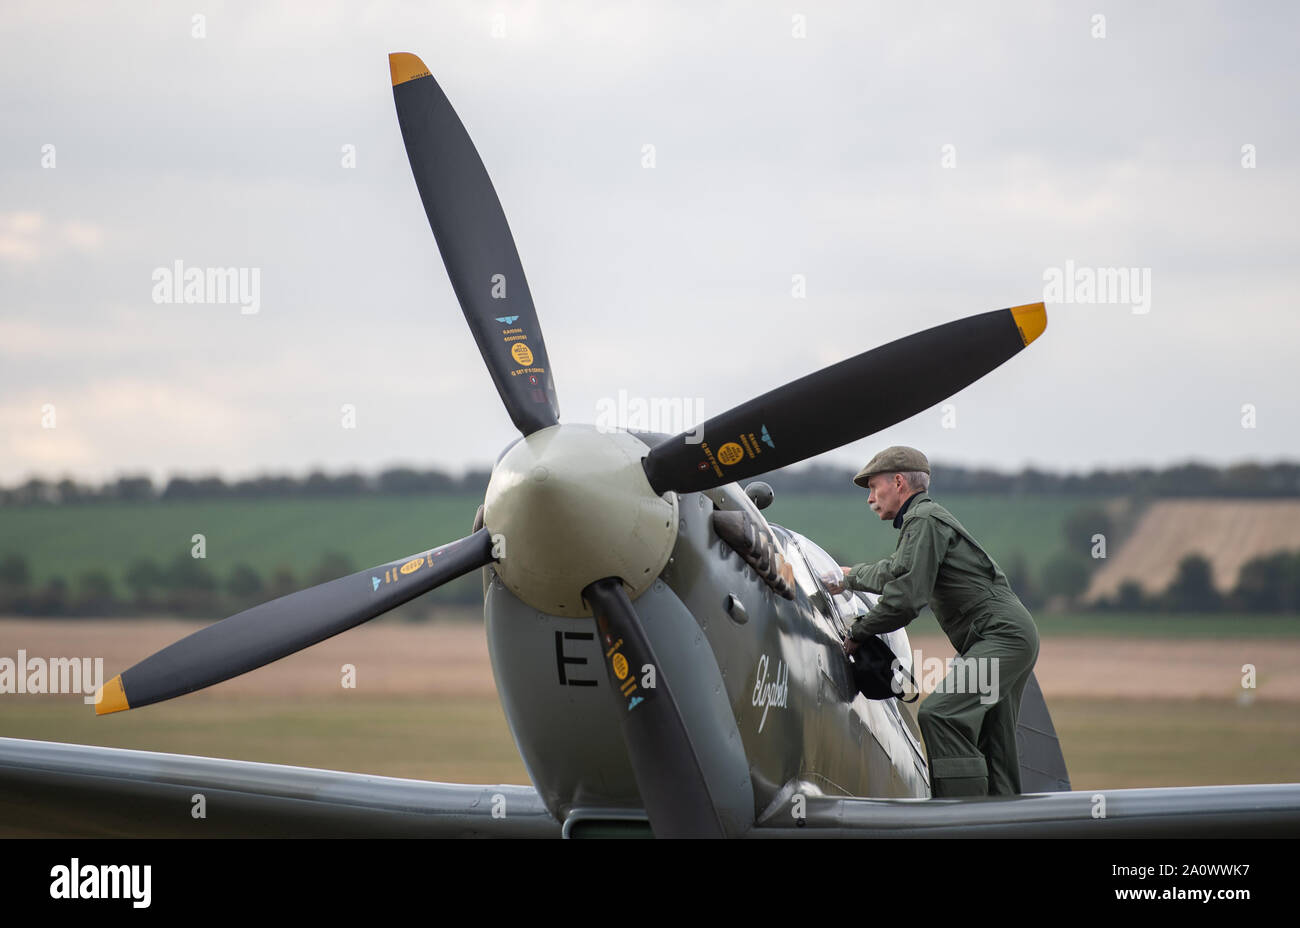 Pilot Charlie Brown opens the canopy of his Supermarine Spitfire during the Duxford Battle of Britain Air Show at the Imperial War Museum in Duxford, Cambridgeshire. Stock Photo